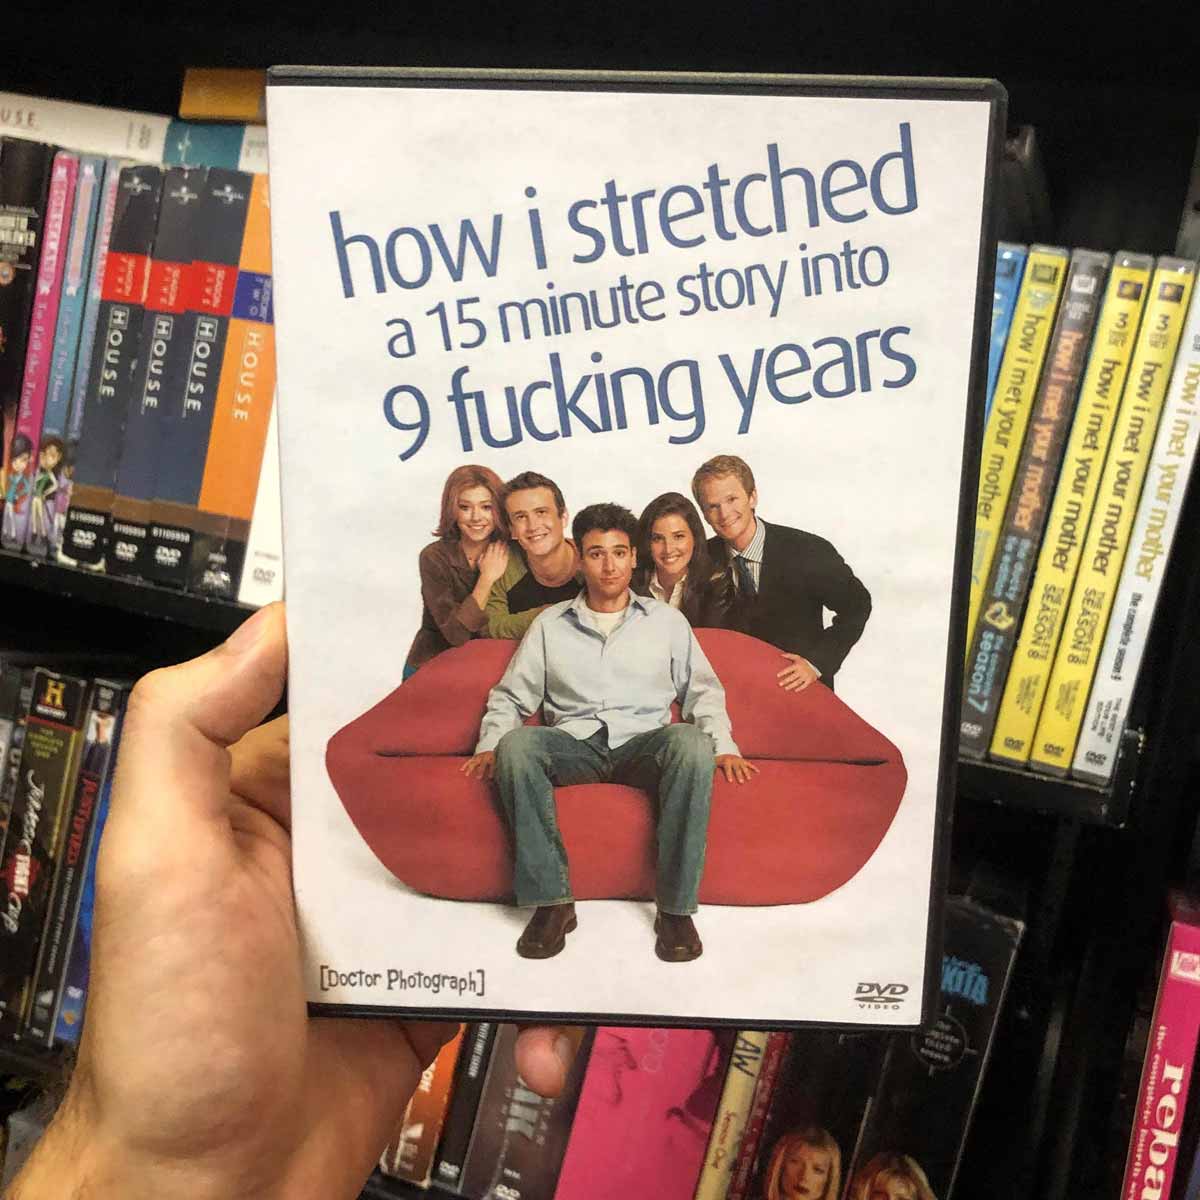 Funny parody dvd box cover for How I met your mother that says 'how i stretched a 15 minute story into 9 Fucking years'